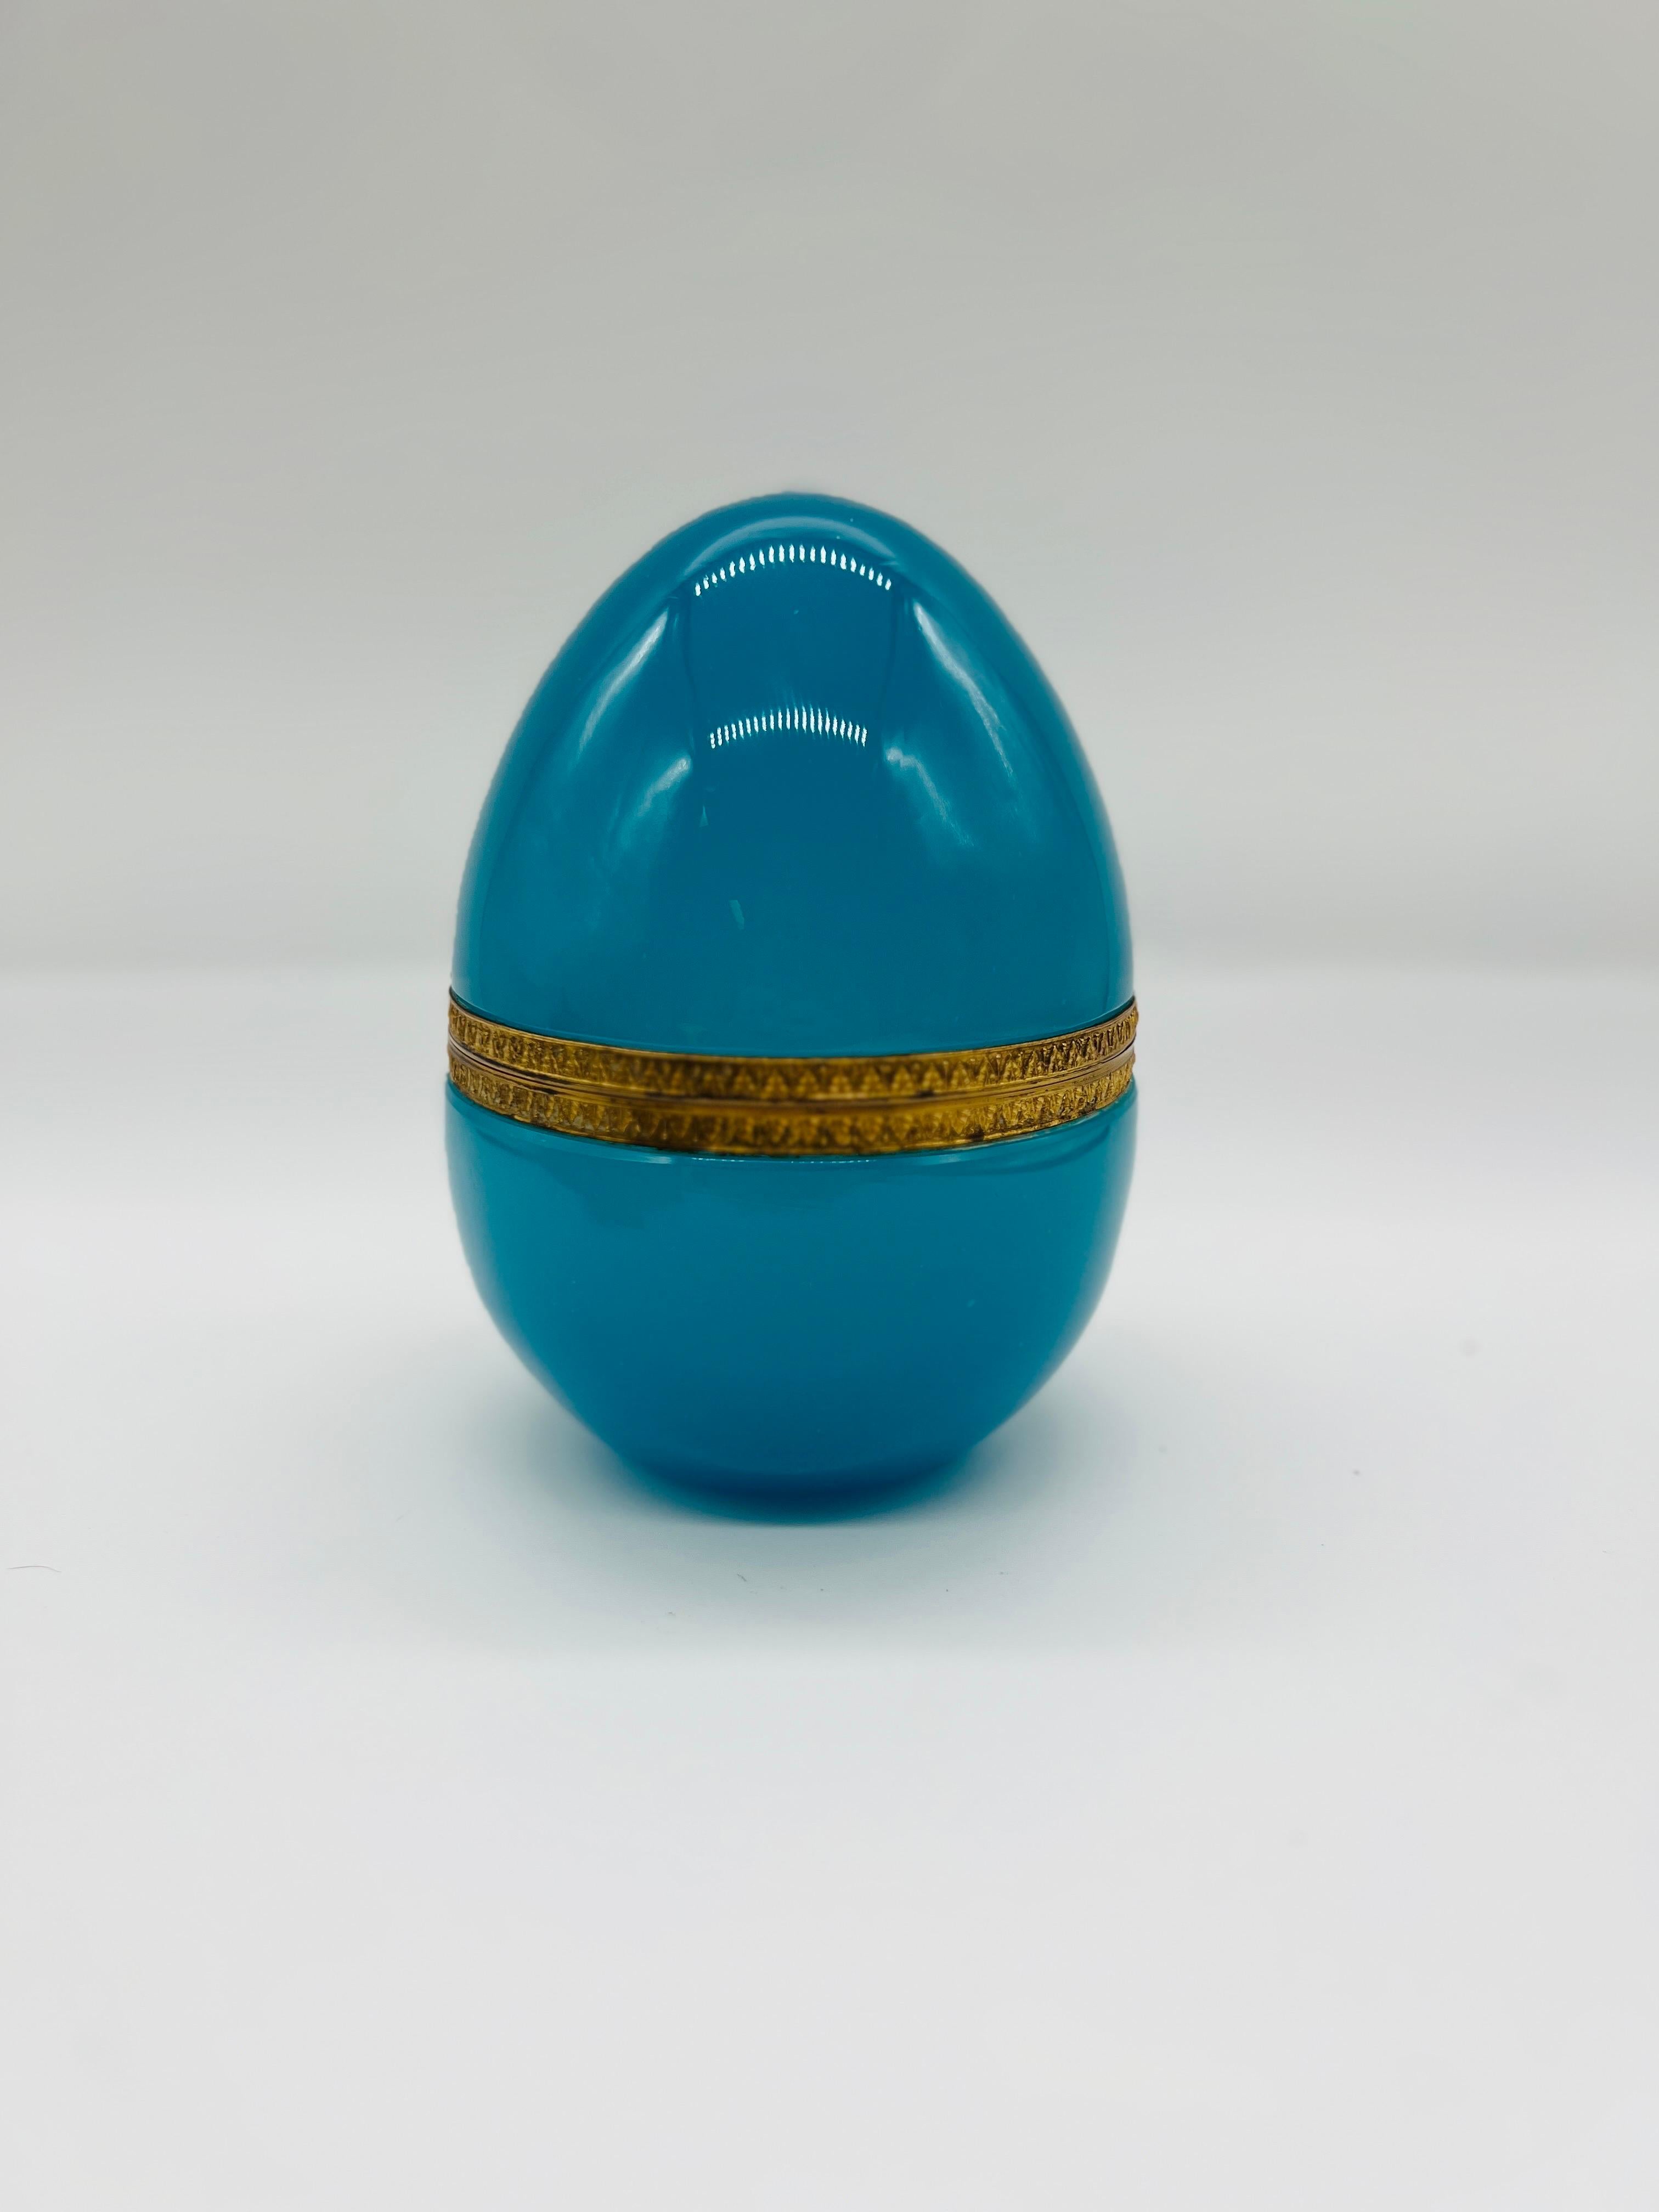 French, 1930's. 
An antique French blue opaline glass egg trinket box. This larger sized egg has a hinged design with foliate engravings to the ormolu band. Unmarked. 